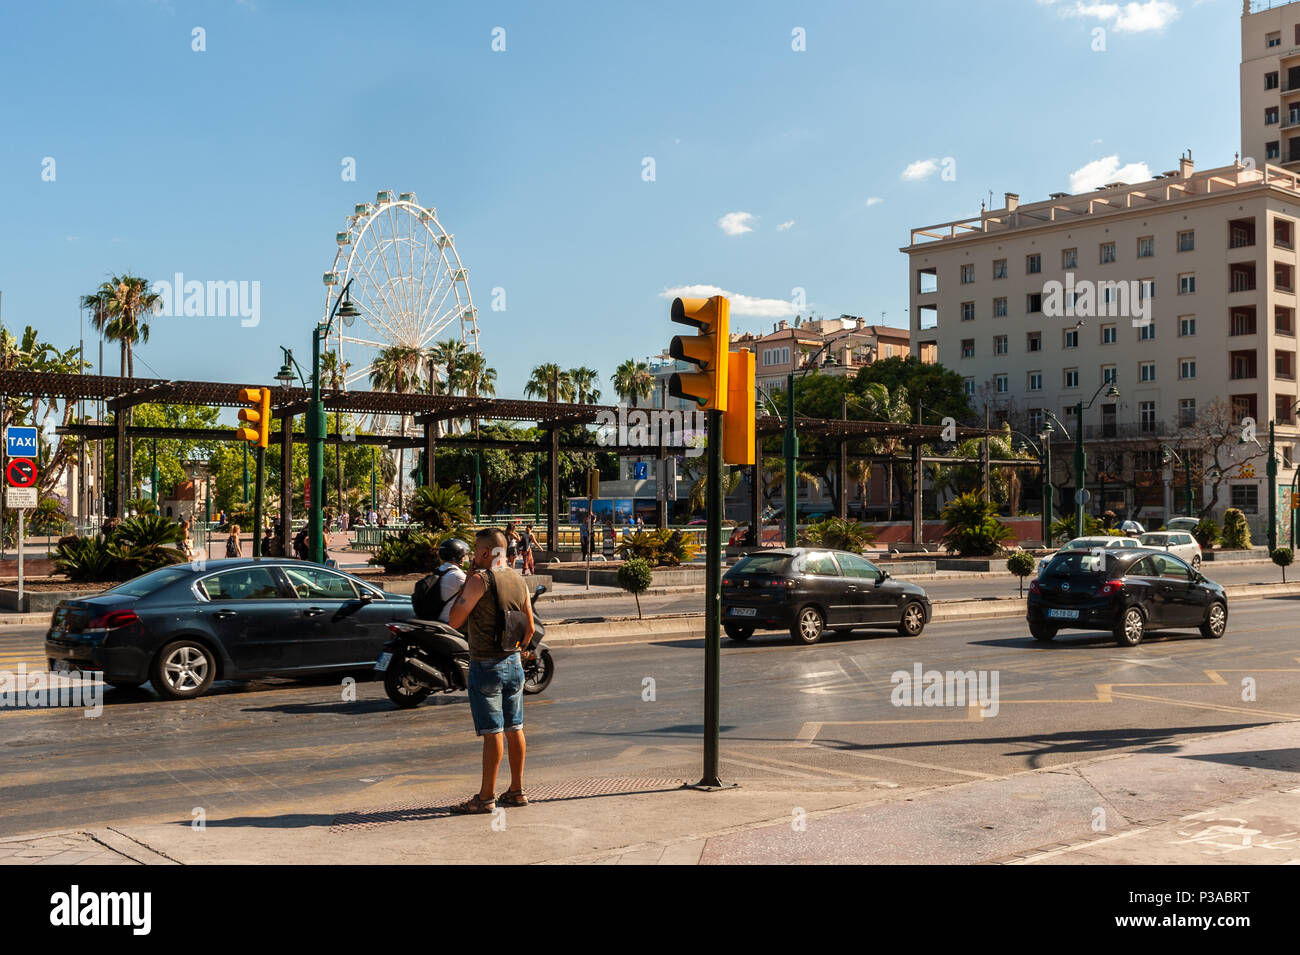 View of the city centre including the ferris wheel (Mirador Princess) in Malaga, Spain with copy space. Stock Photo